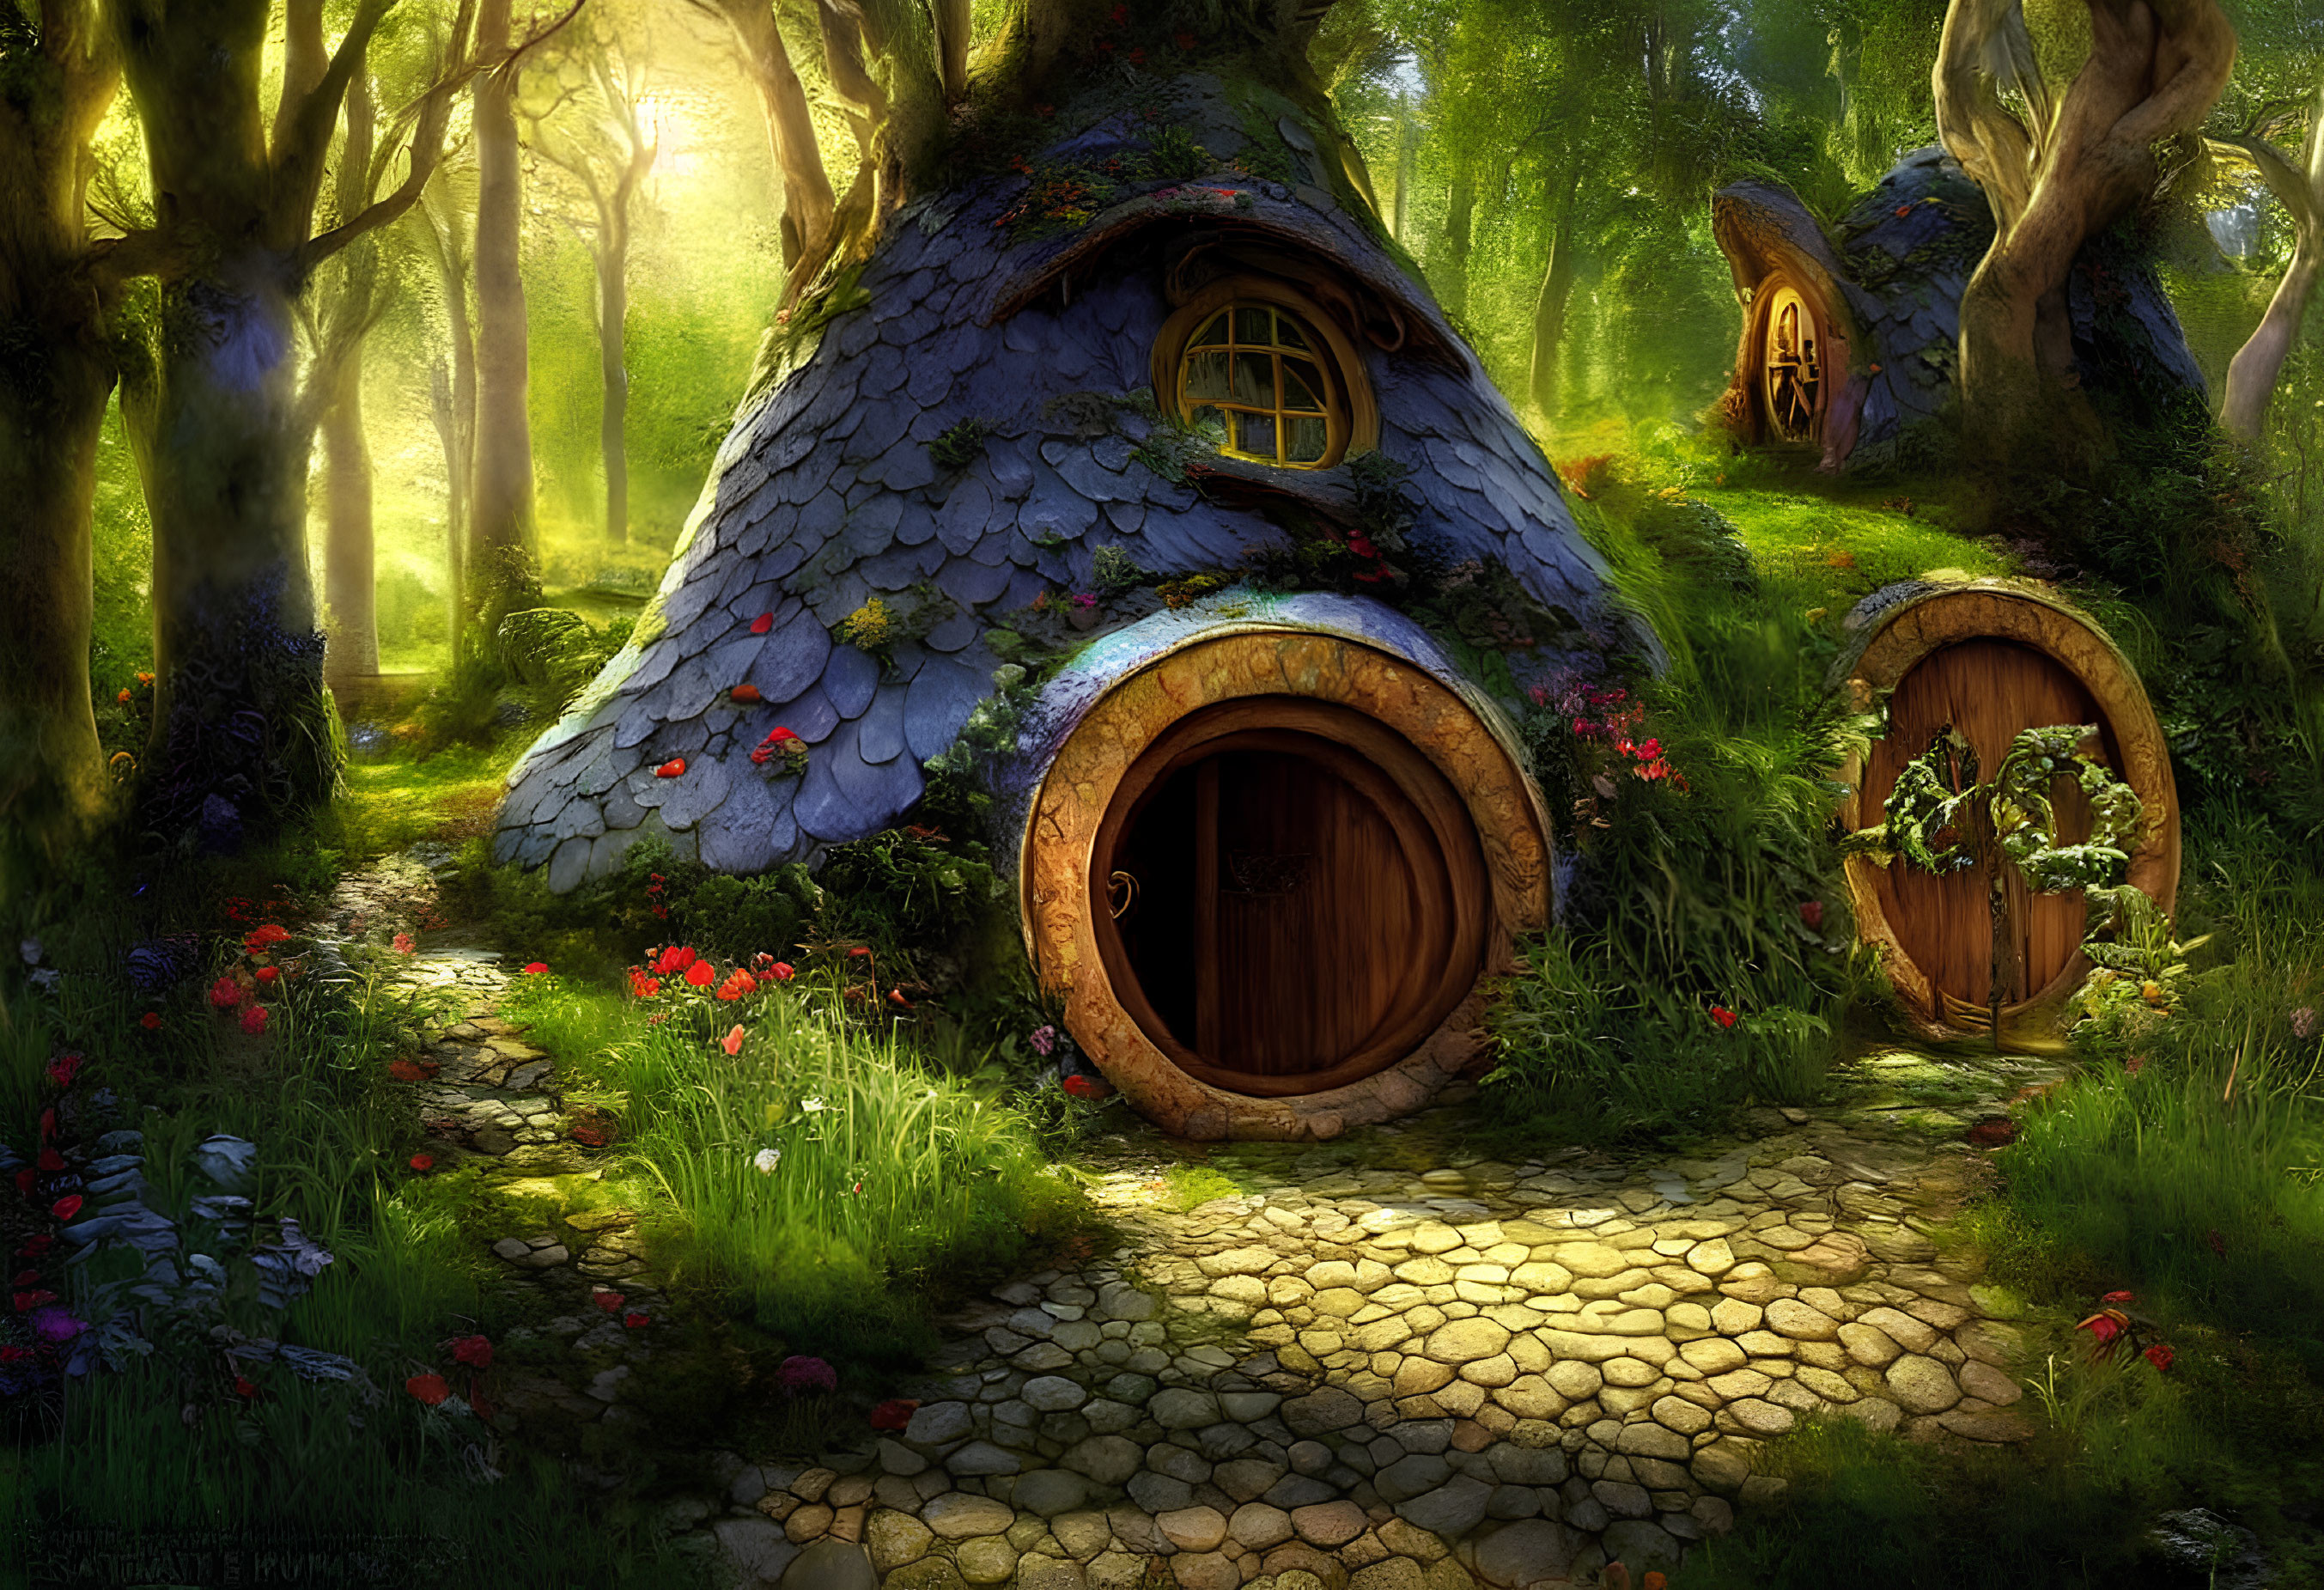 Enchanting forest scene with cobblestone path and fairytale house